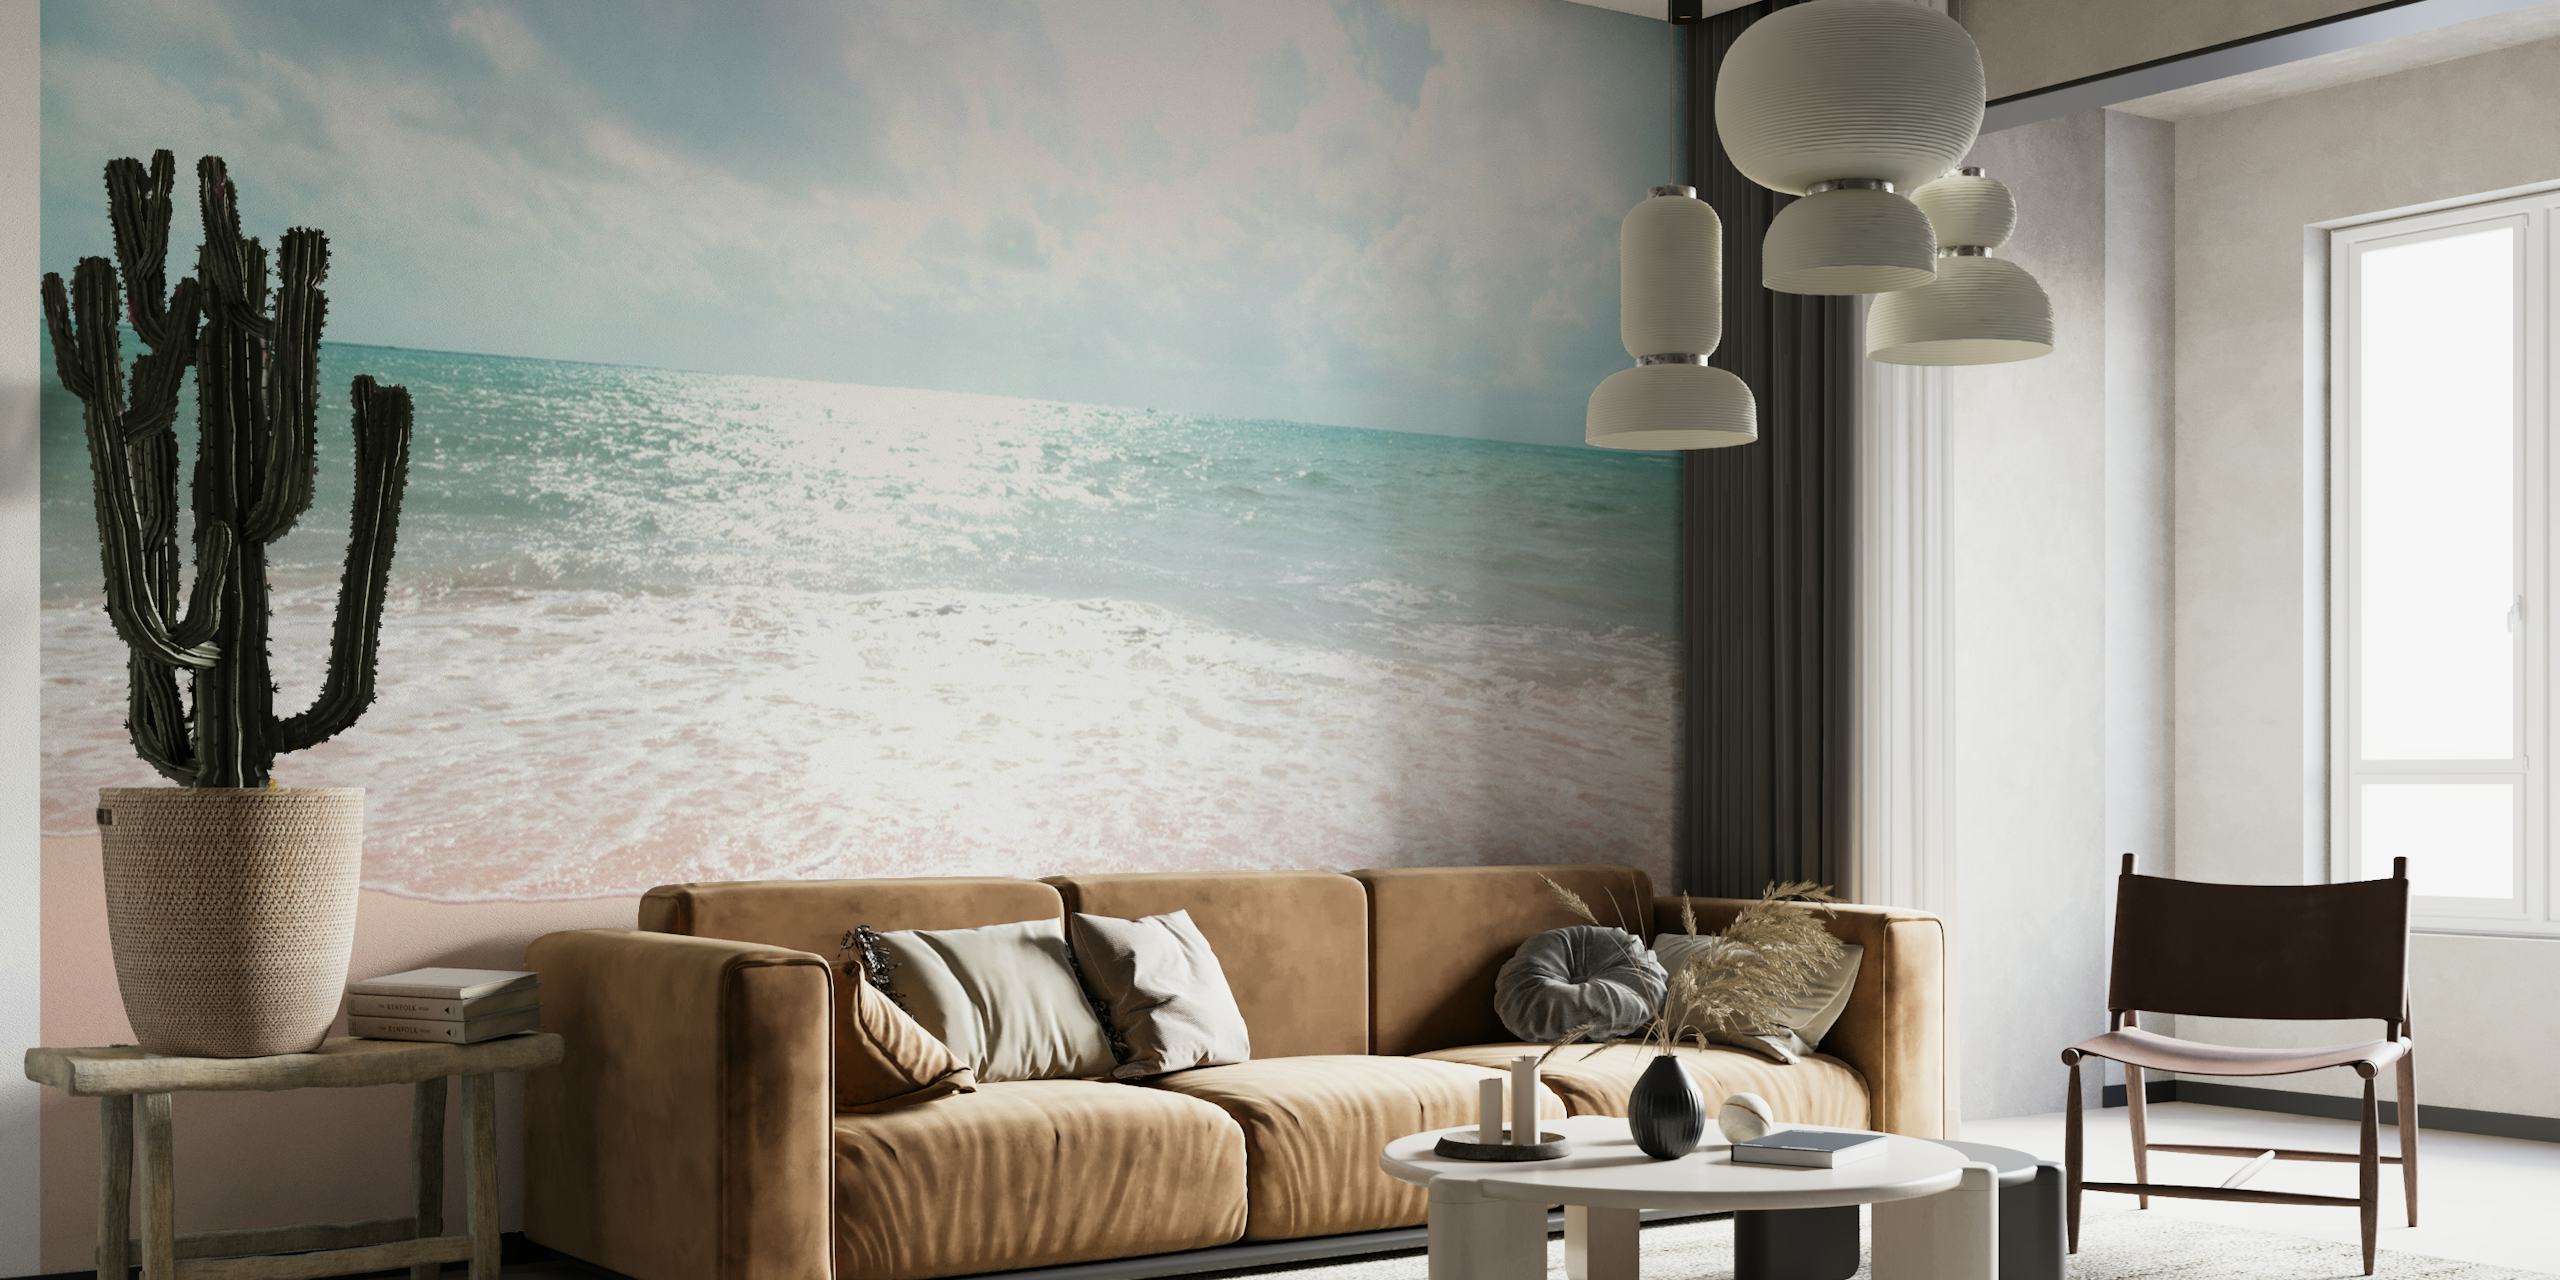 Caribbean Ocean Tranquility 2 wall mural showing serene beach and gentle waves